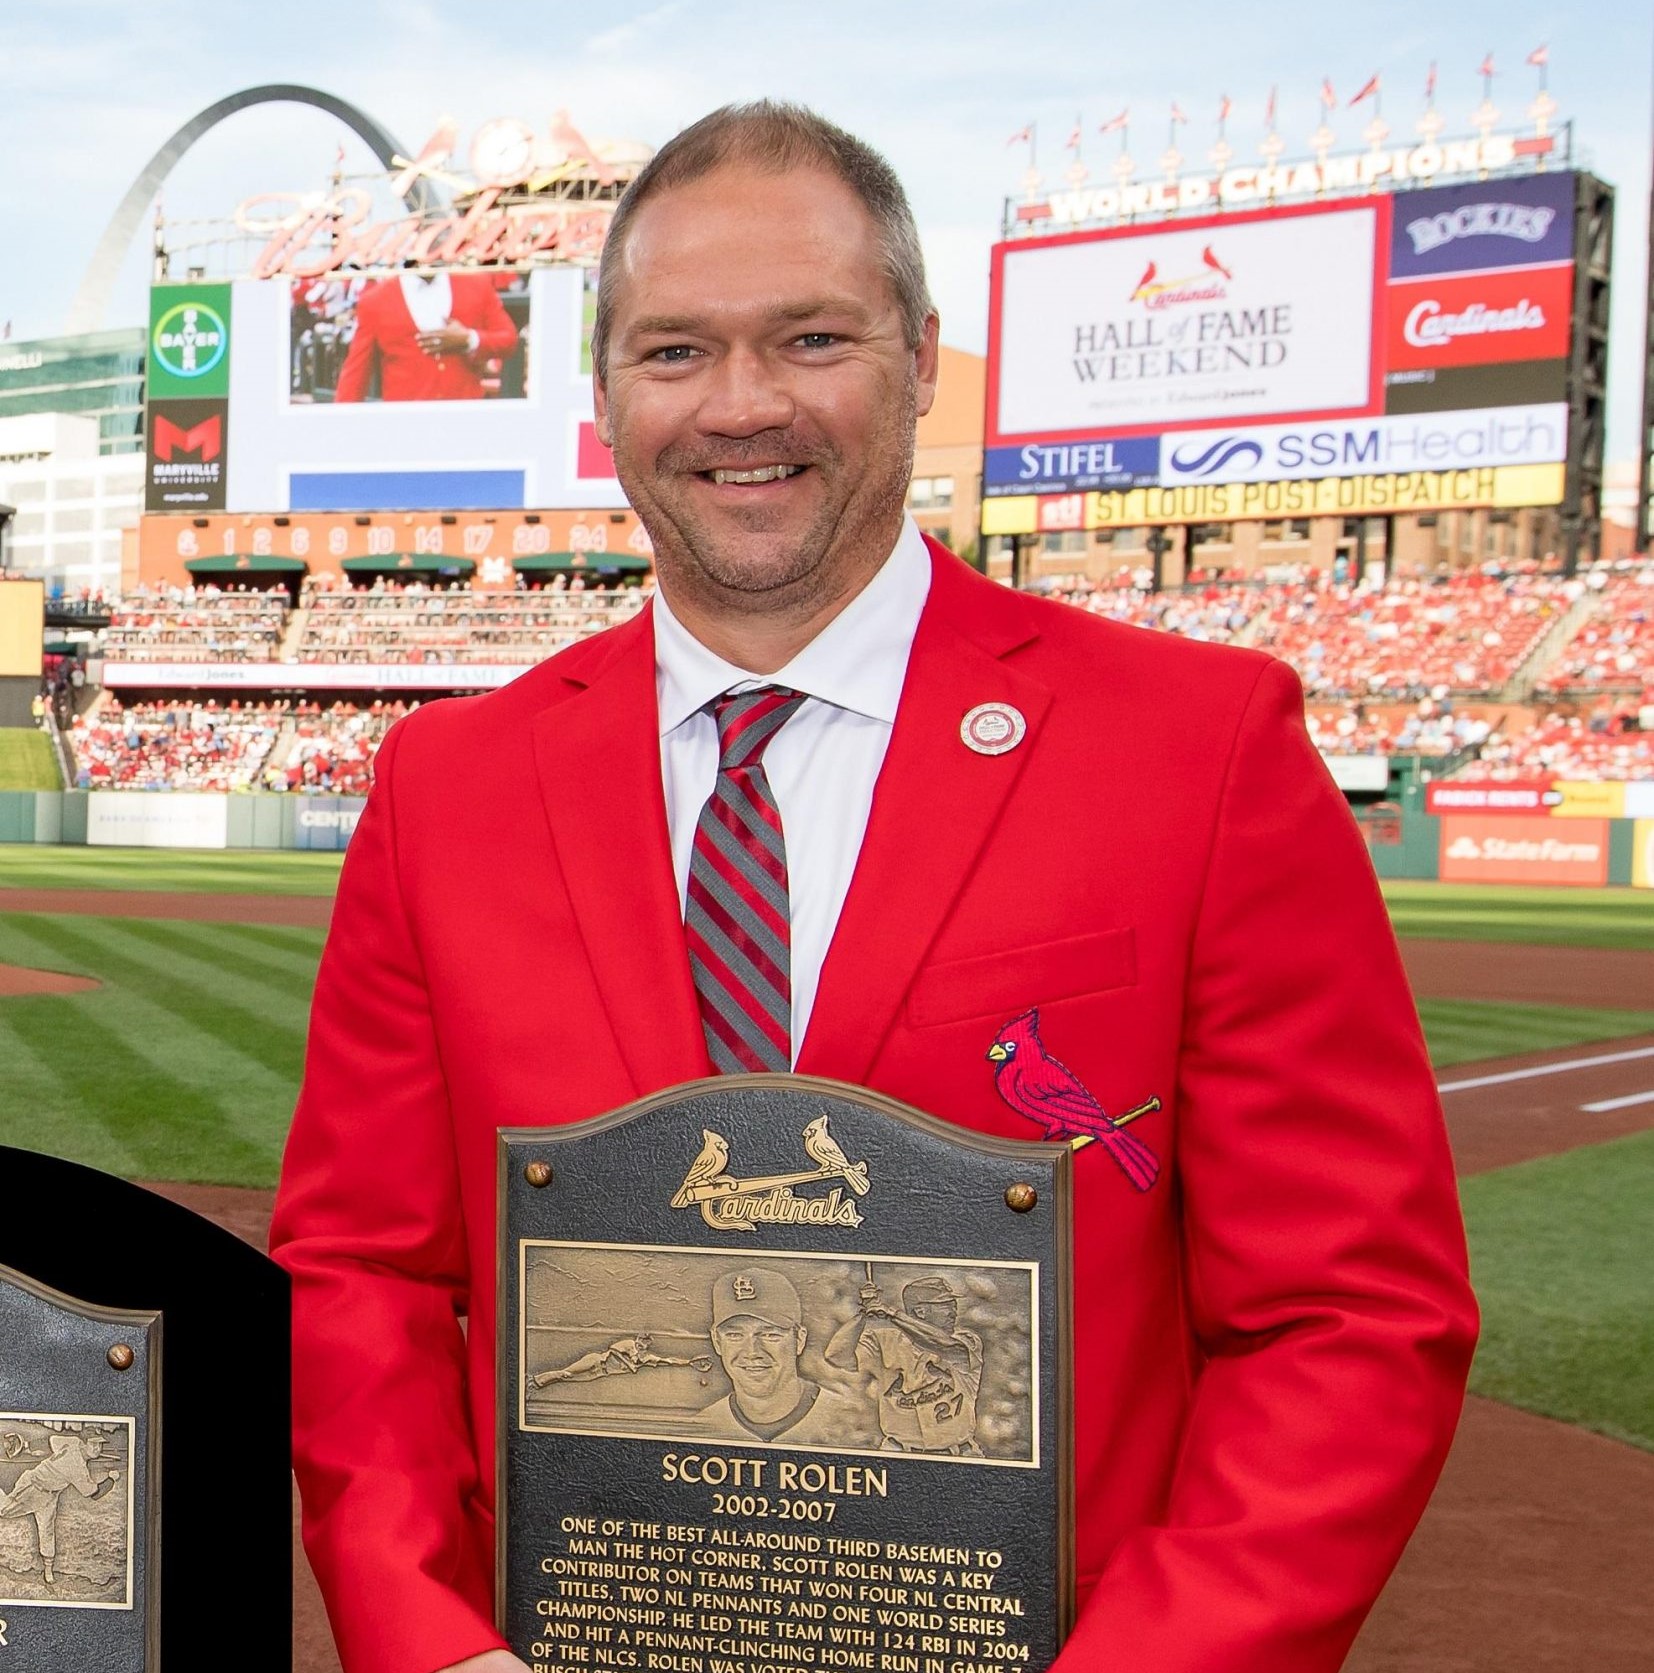 Scott Rolen credits success with Cardinals for his place among